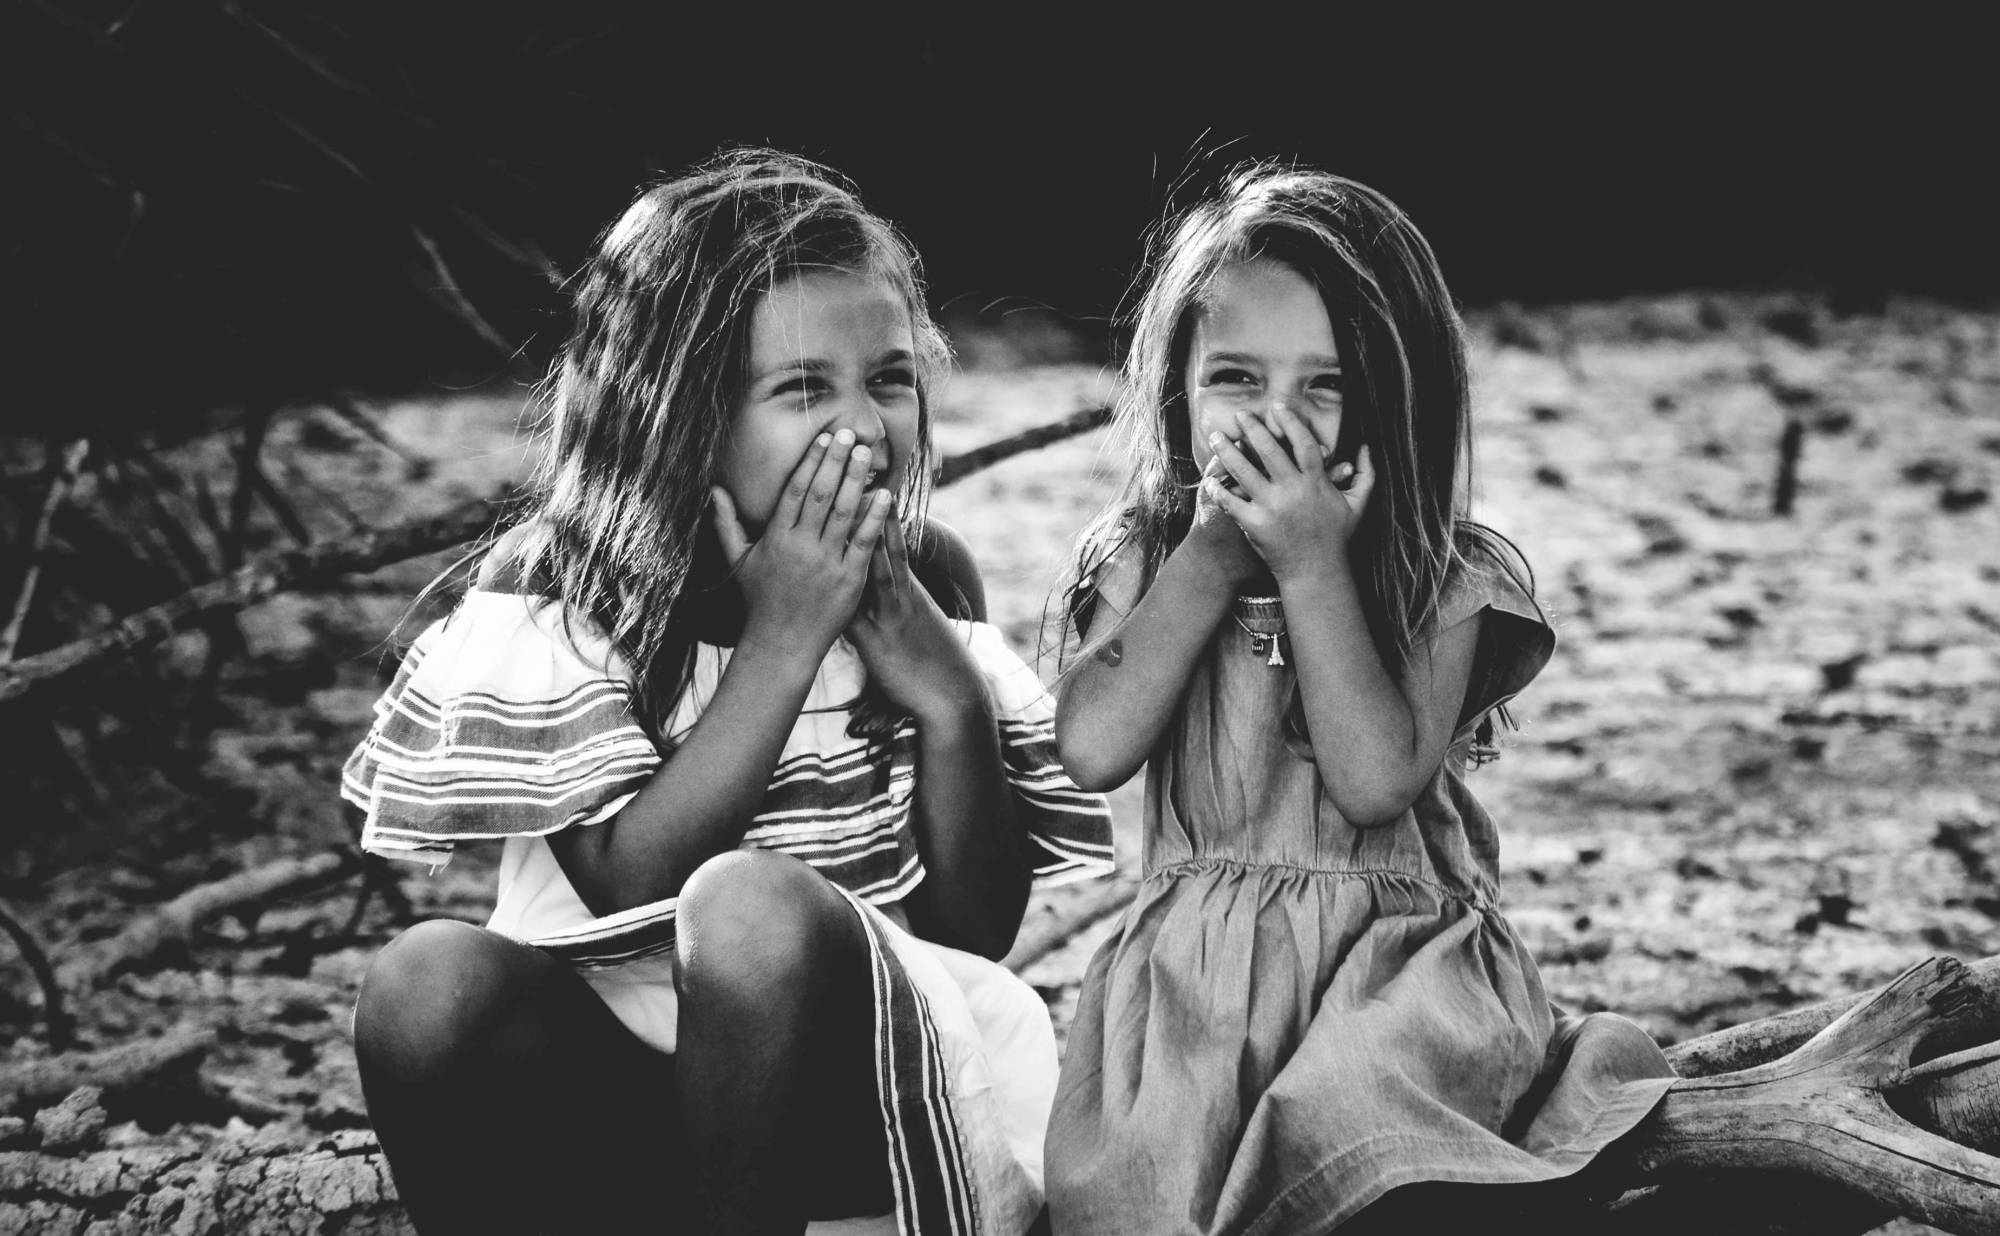 A black and white photo of two young girls laughing.